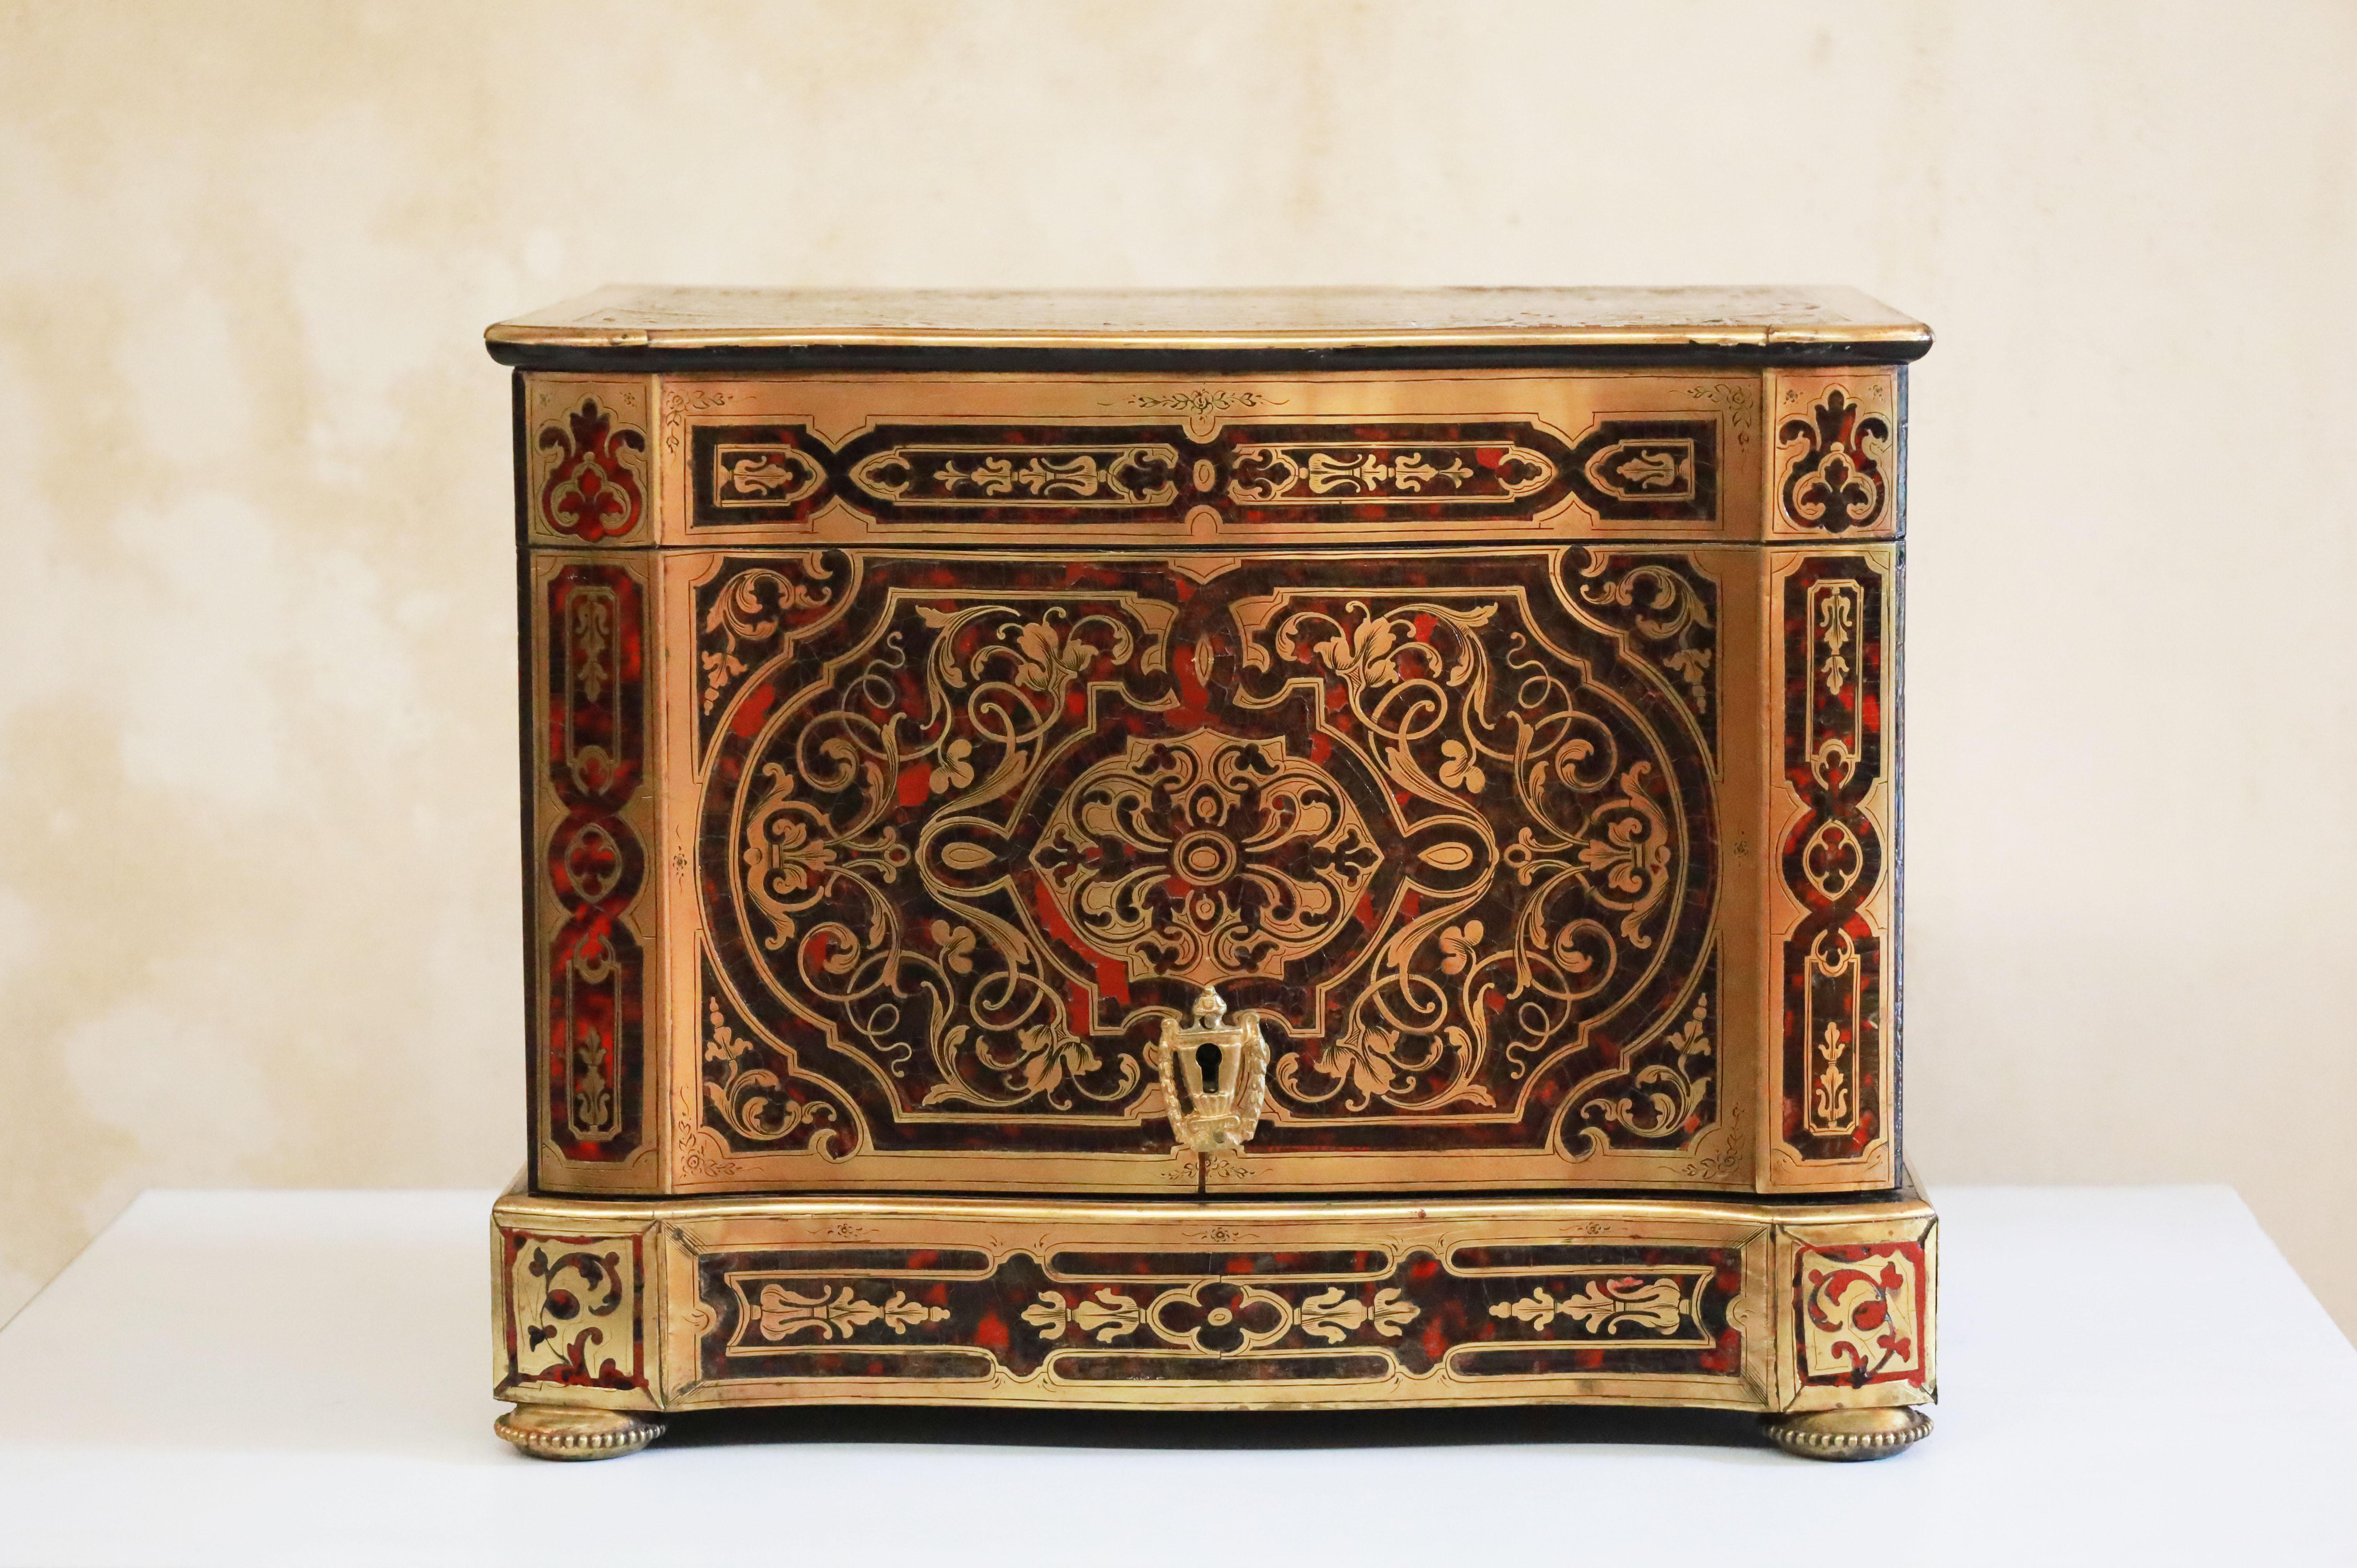 French 19th century Louis Philippe Boulle cave a liqueur. Made of  Tortoiseshell, brass, and ebonized Fruitwood. Inlaid floral elements on a Tortoiseshell  and wood.

 The top lifts up and locks in place while the front folds in to showcase the